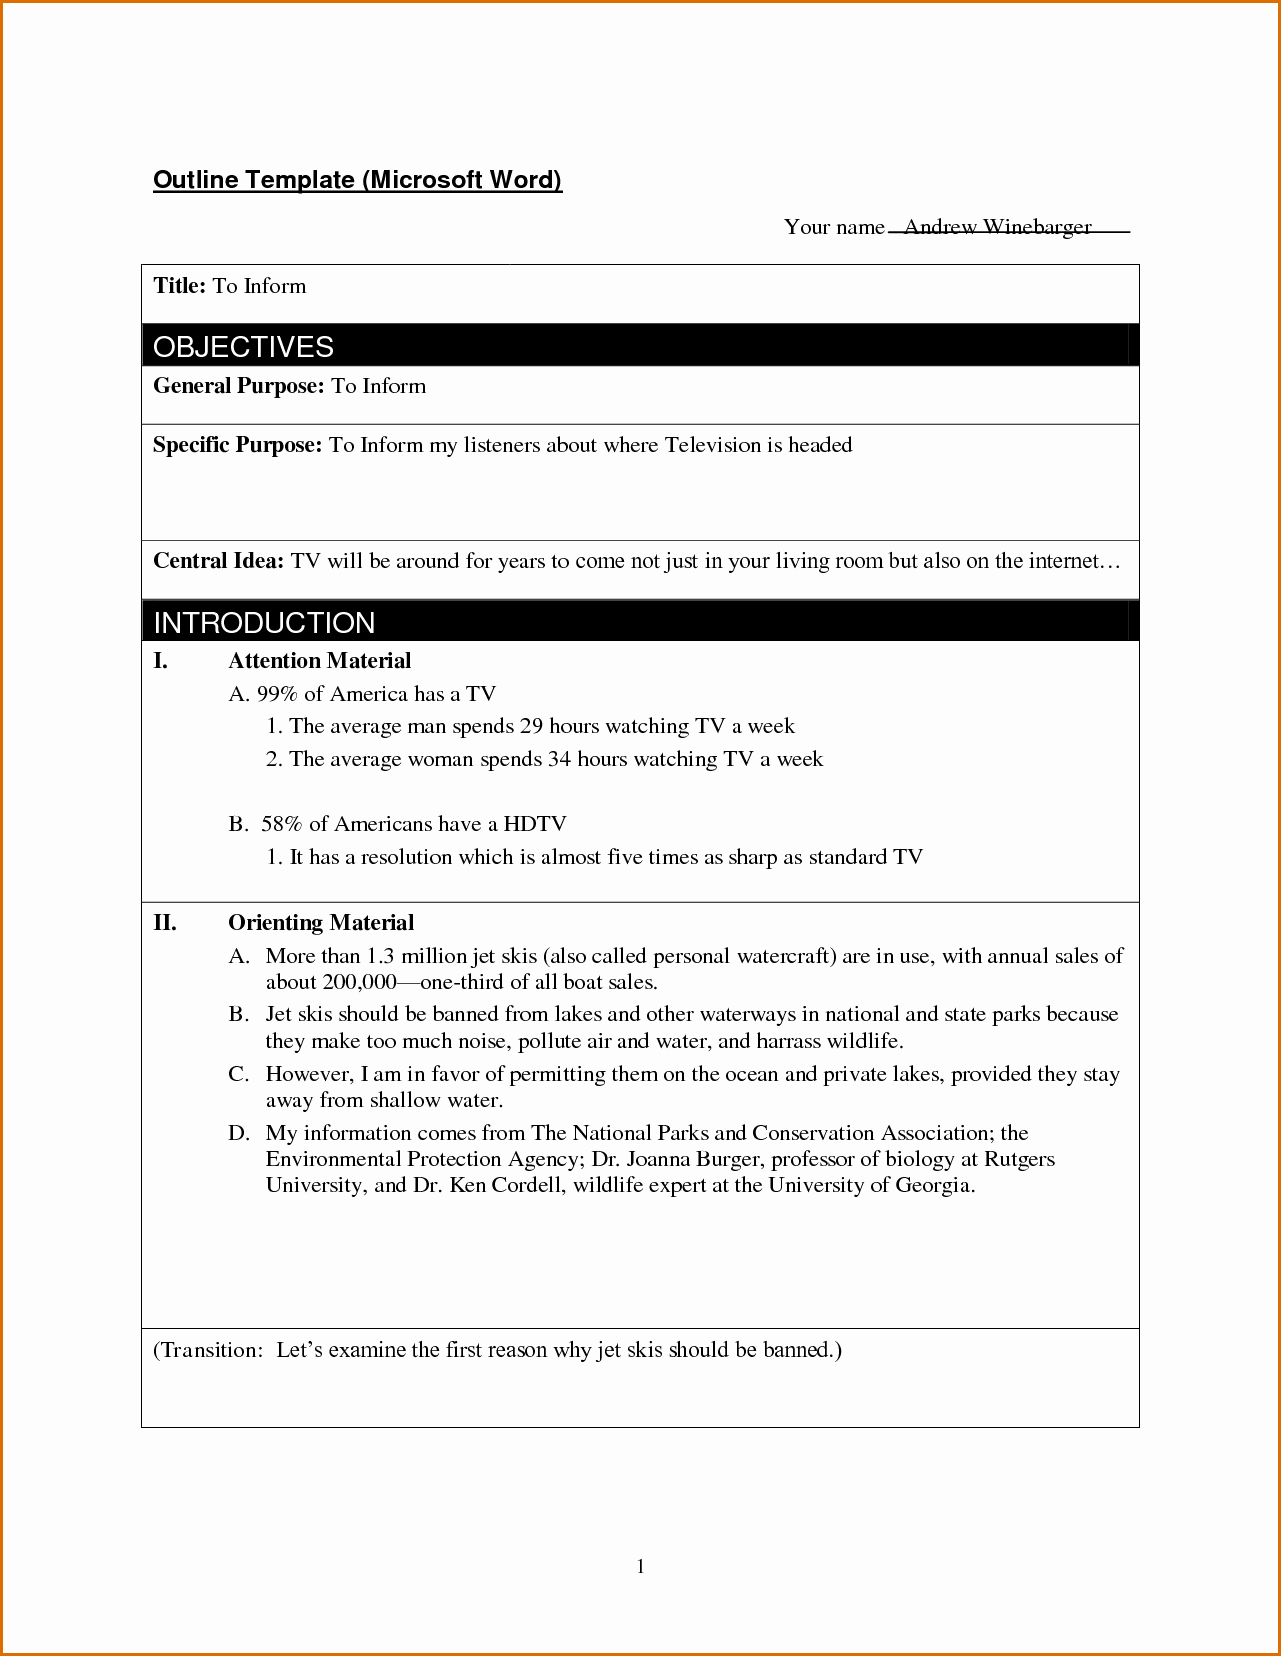 Microsoft Word Outline Template Best Of 13 Microsoft Word Outline Template